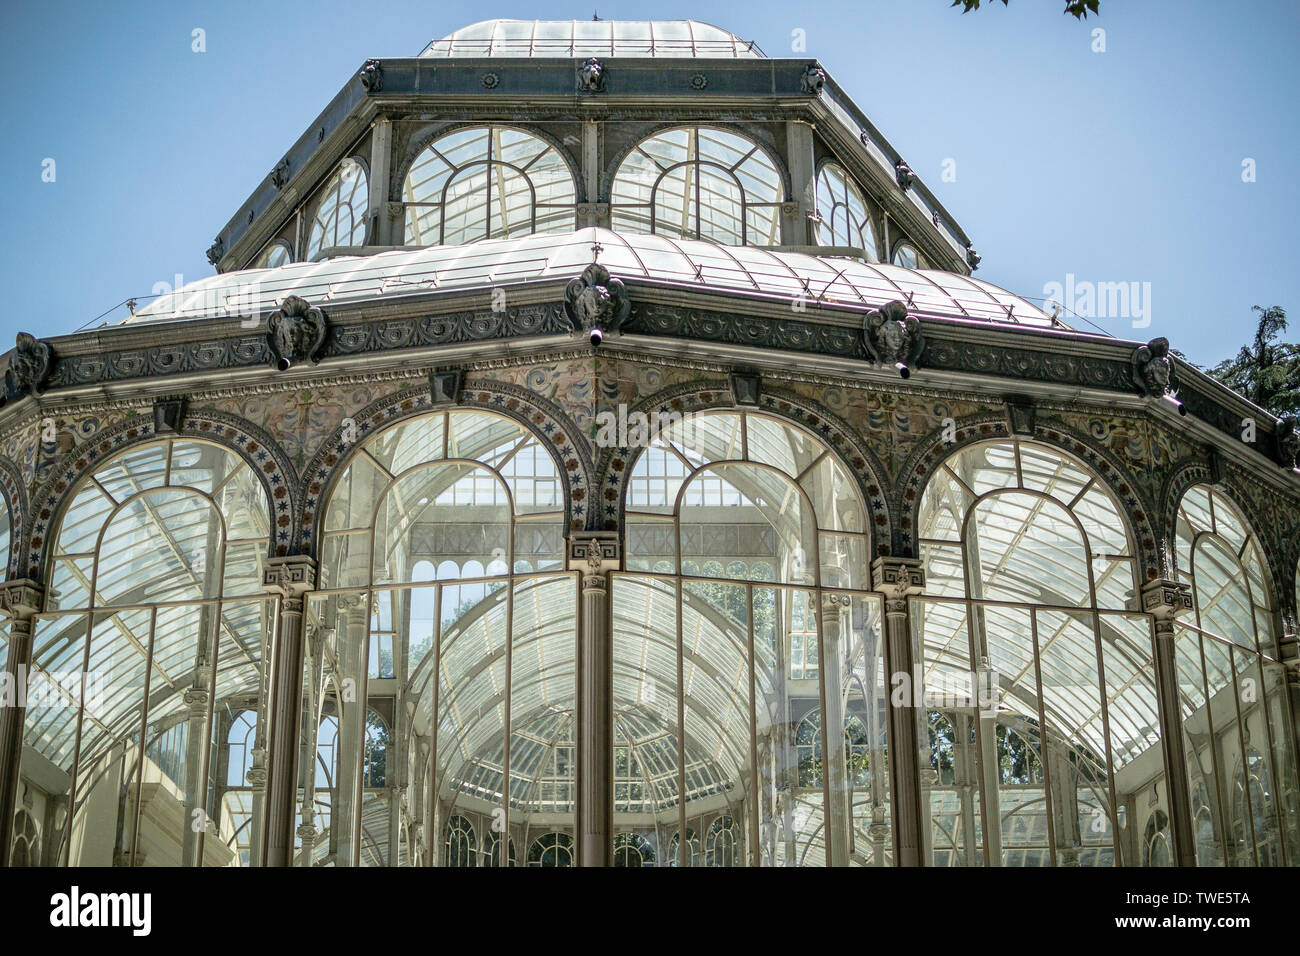 Palacio de Cristal (Crystal Palace) former conservatory turned gallery space in Madrid, built in 1887 with cast-iron frame and brick base Stock Photo